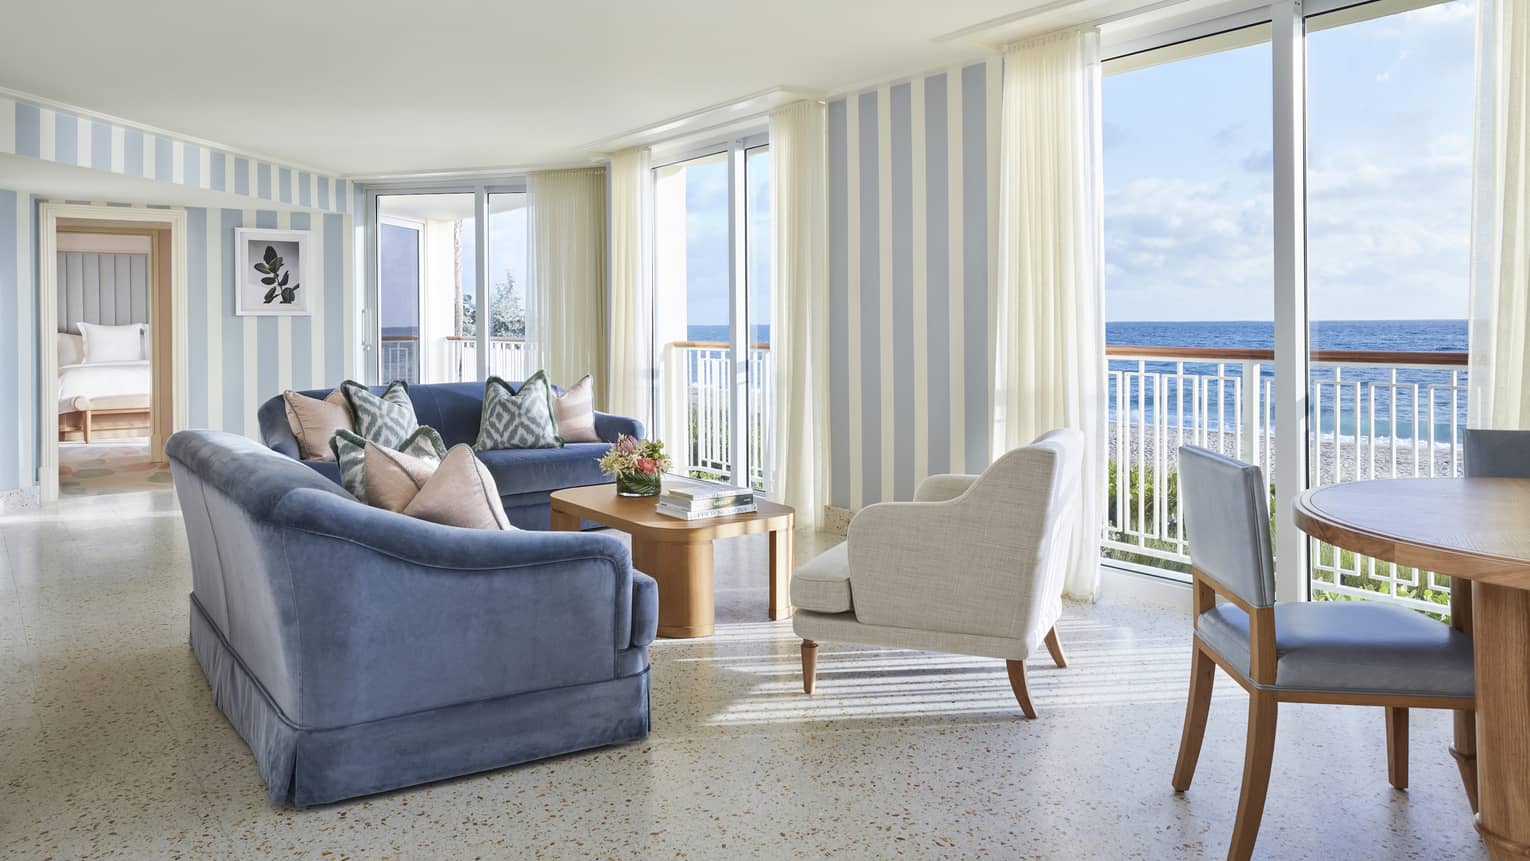 Living area in a suite, with blue sofas, a white armchair and floor-to-ceiling views of the ocean